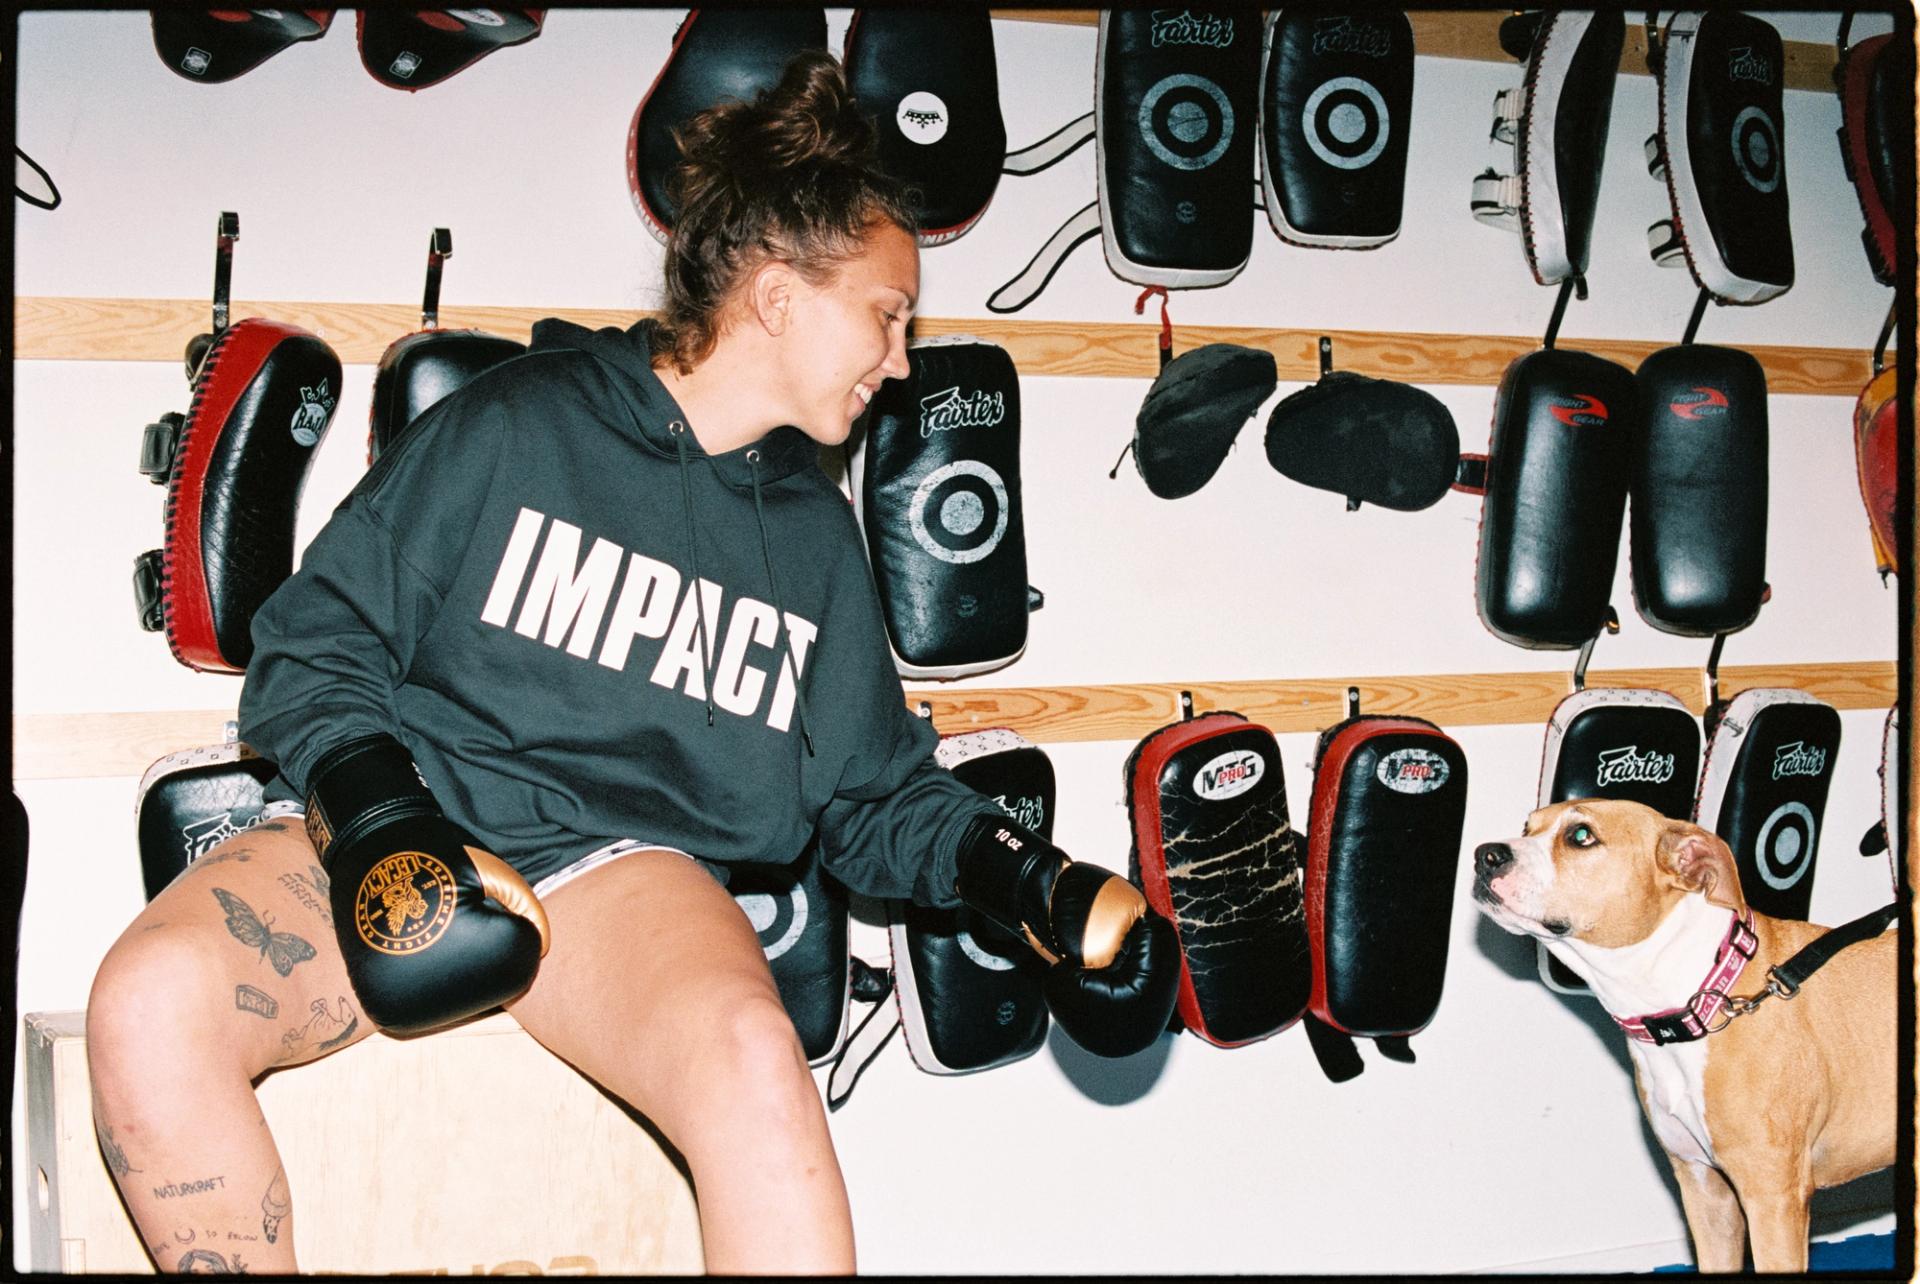 Impact Gym in Stockholm is more than just a Muay Thai and martial arts centre. It's a community, drawing people together from all walks of life.